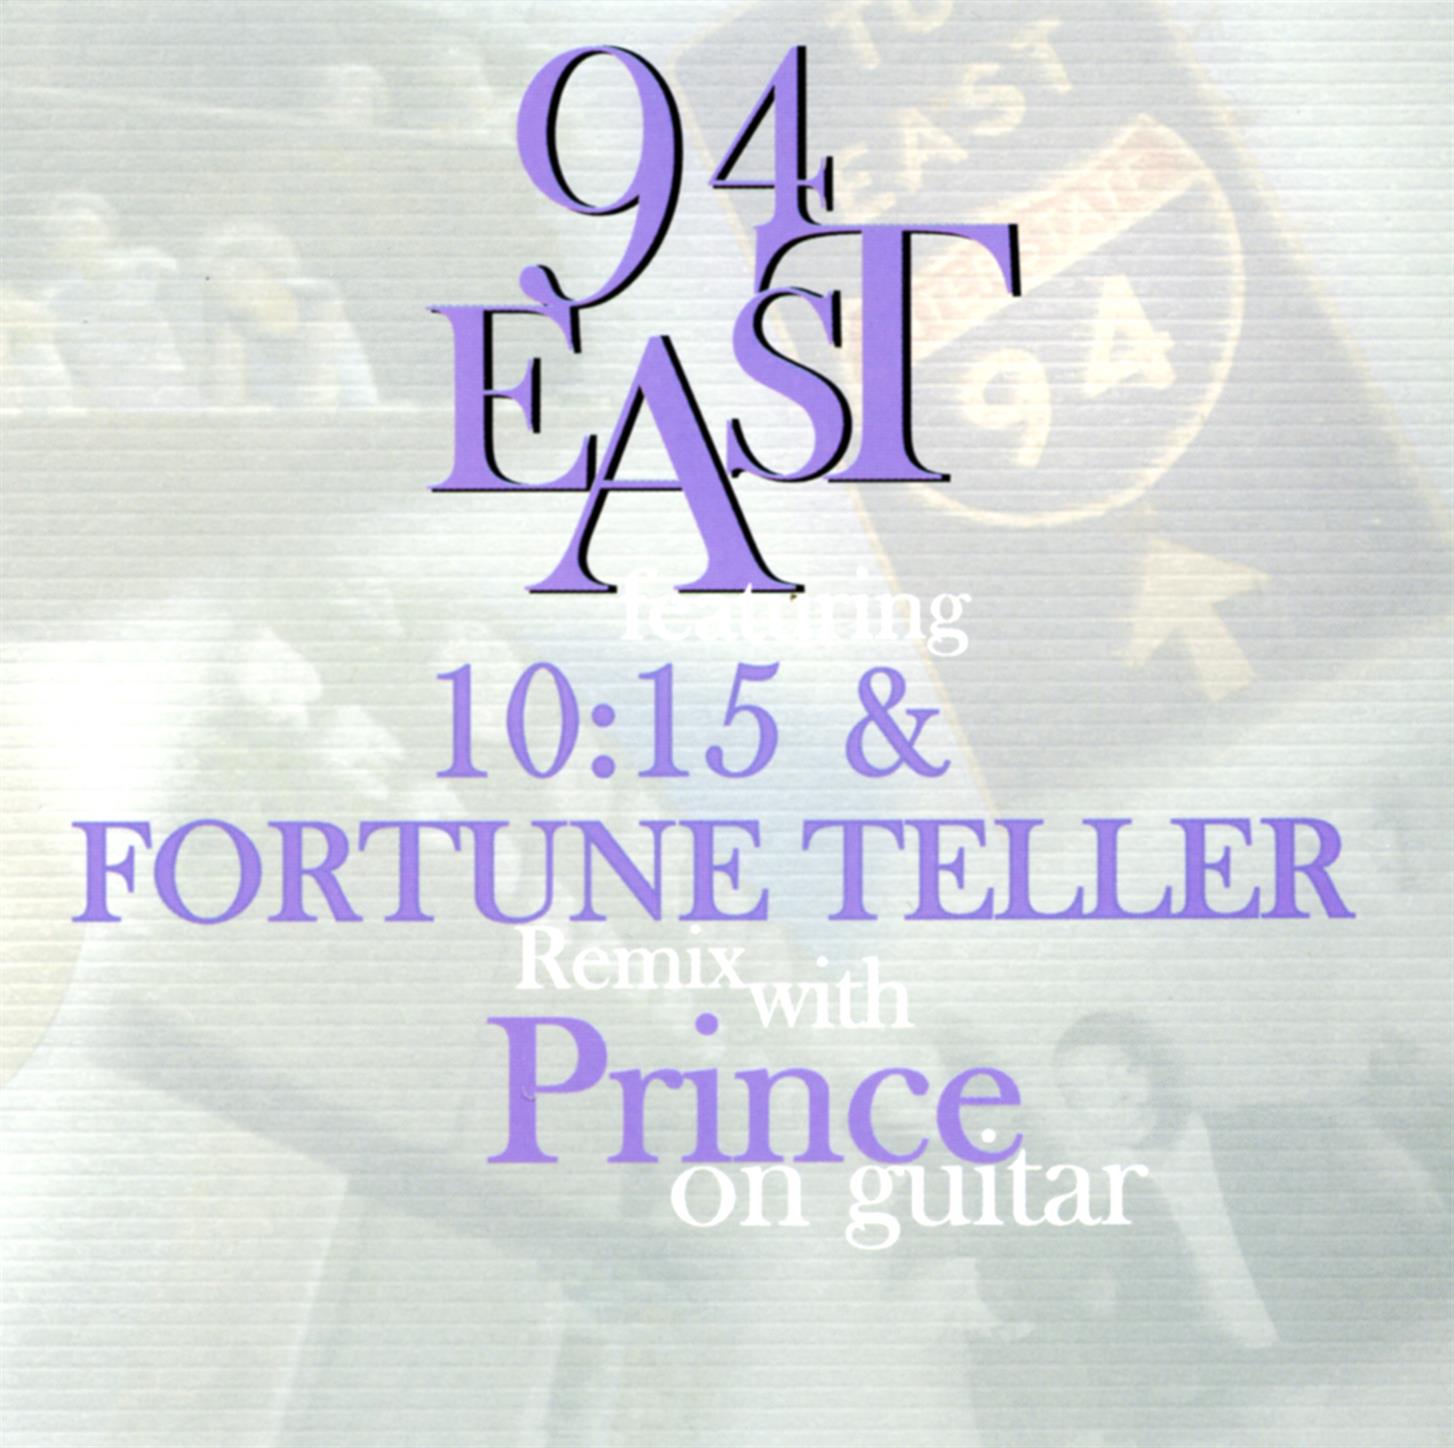 94 East Featuring "10:15" & "Fortune Teller" (Remix) With Prince On Guitar